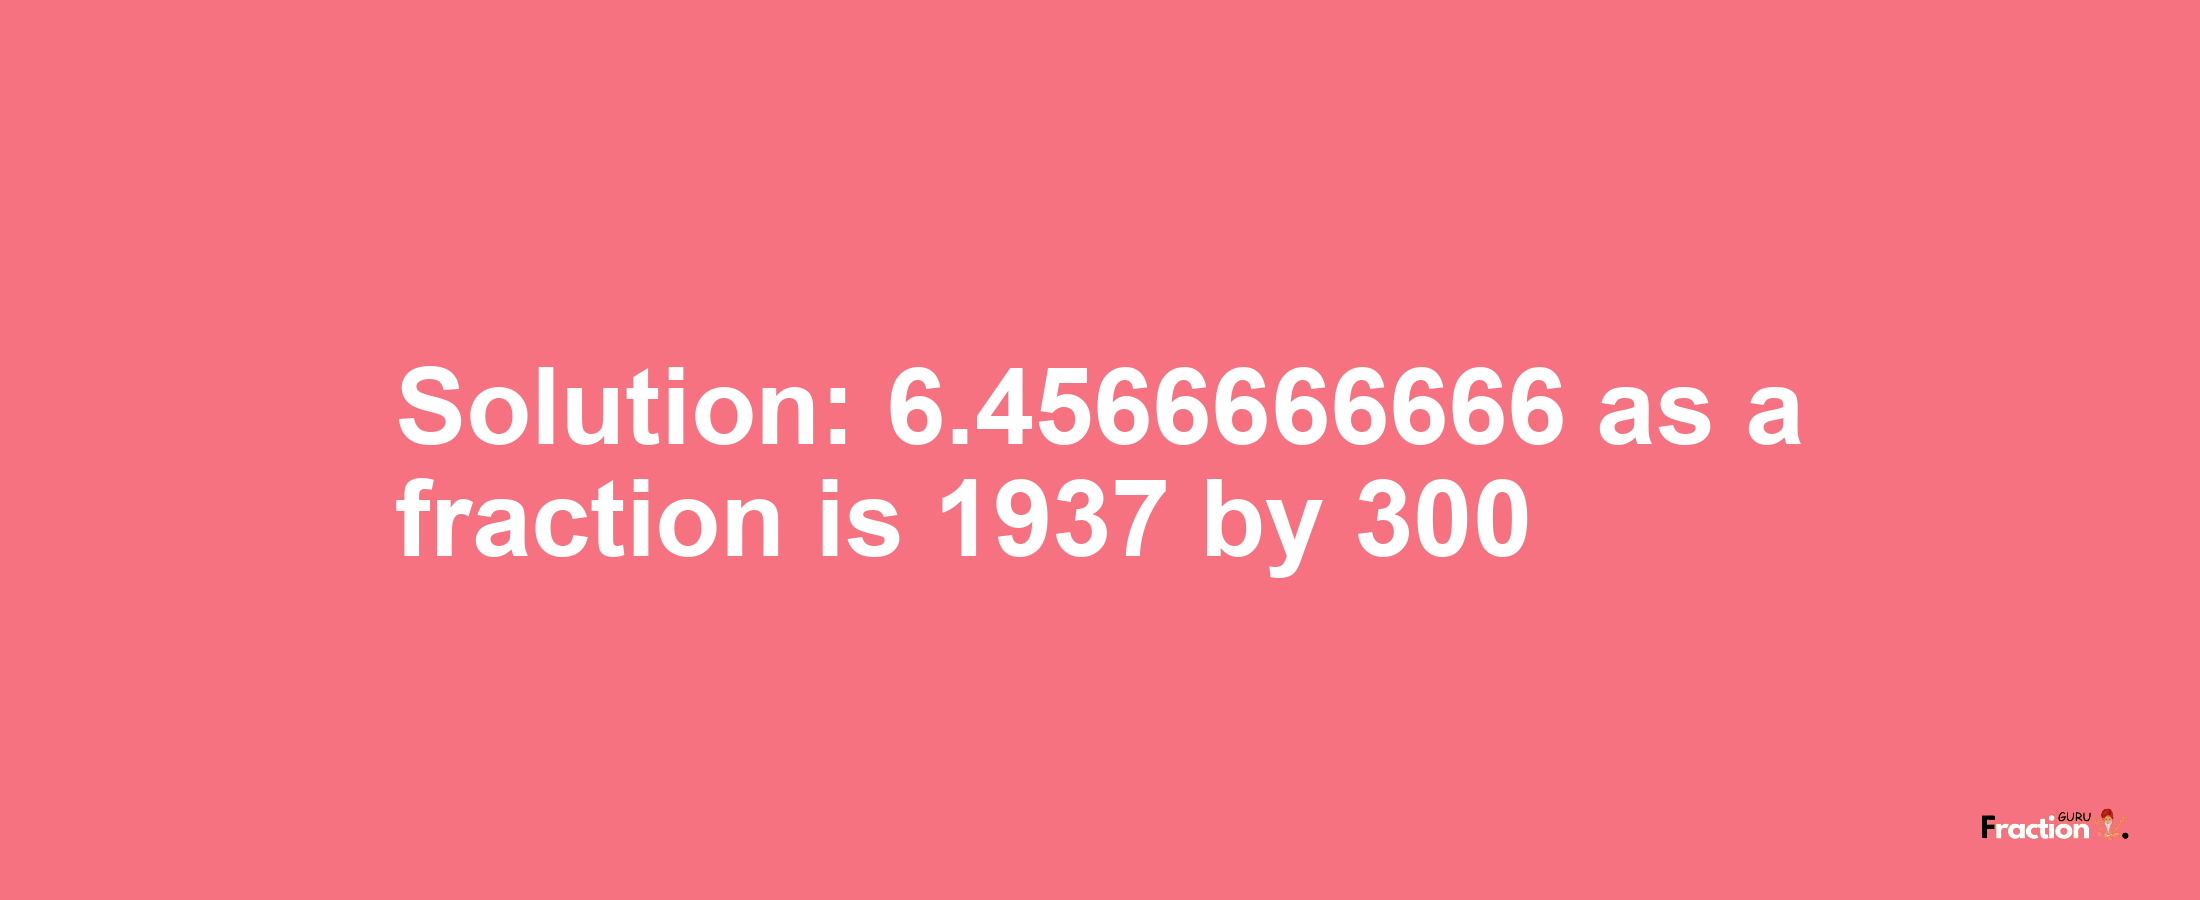 Solution:6.4566666666 as a fraction is 1937/300